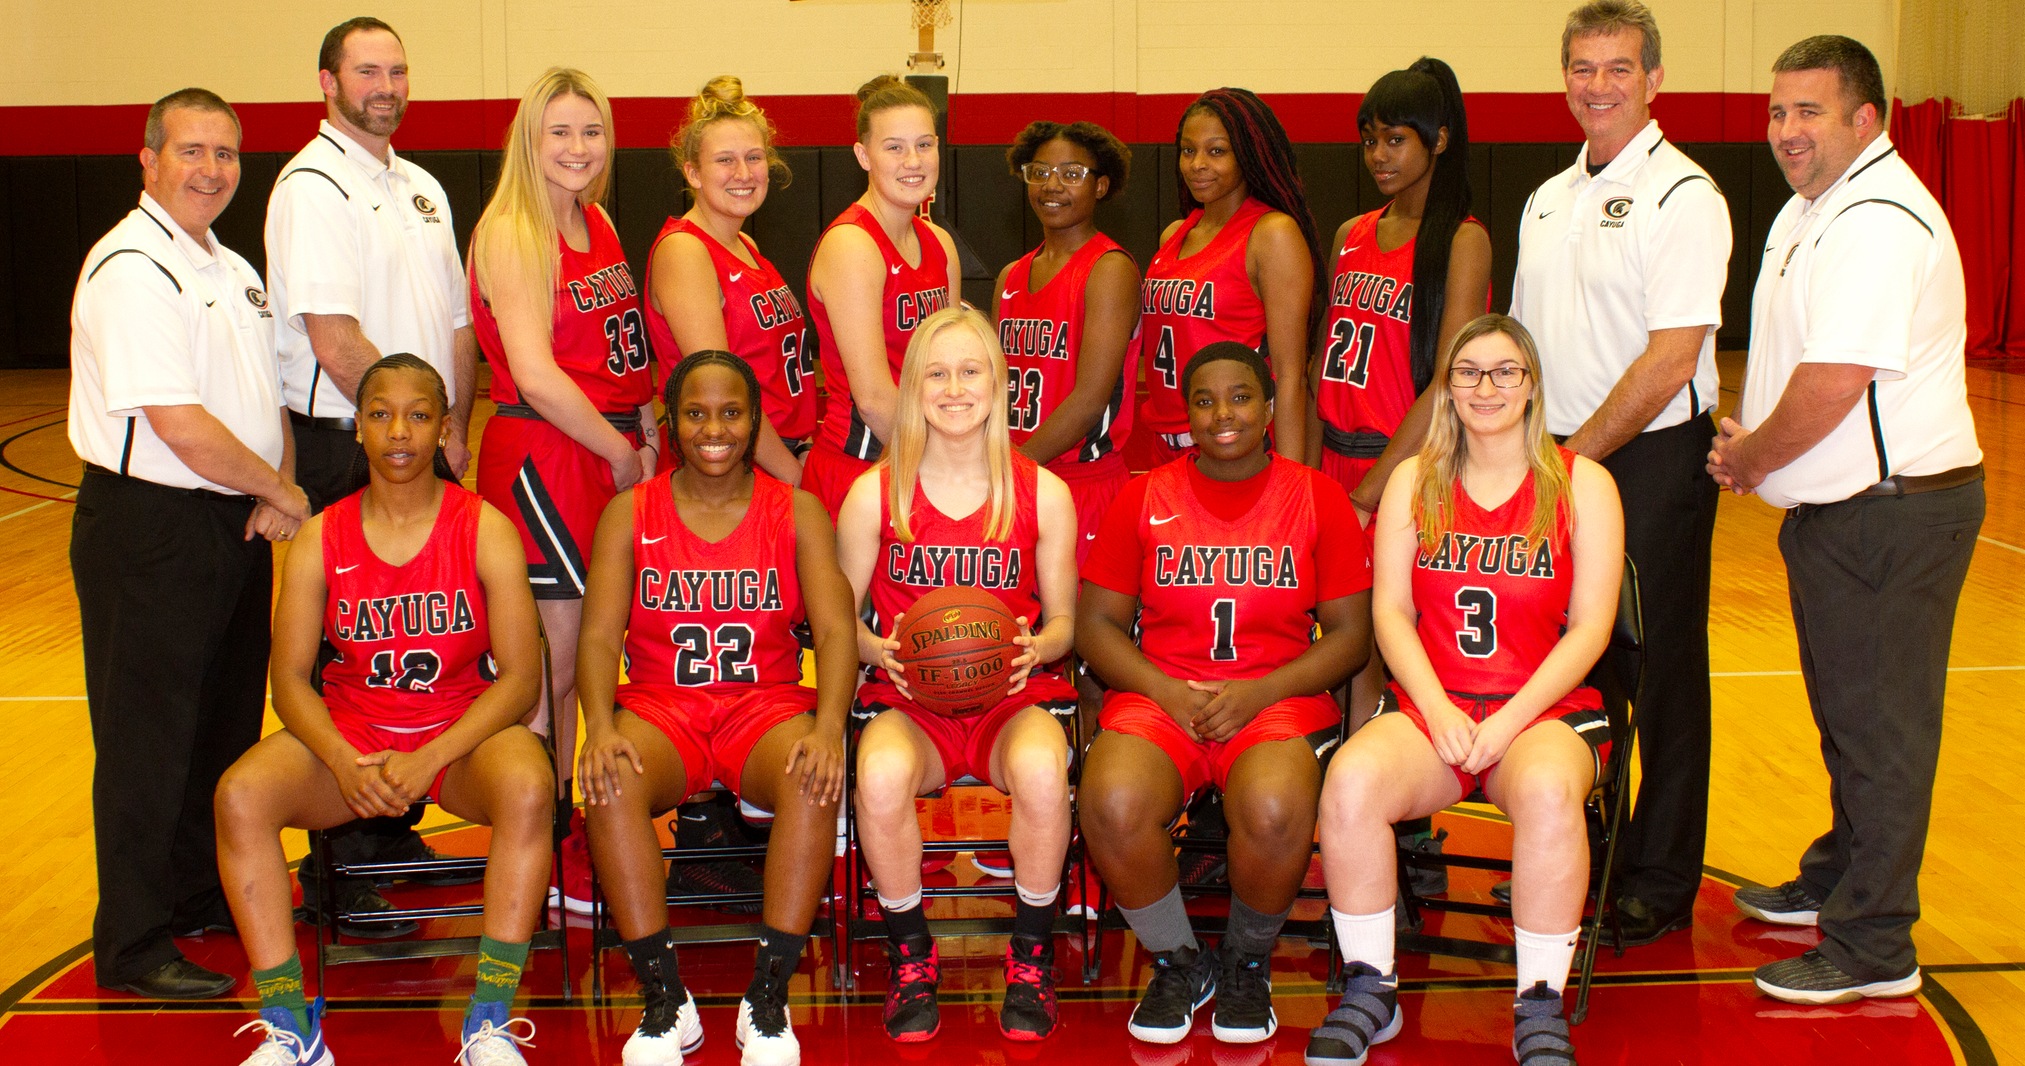 The 2018-2019 Cayuga Community College Women's Basketball Team finished the season with a 6-16 record.